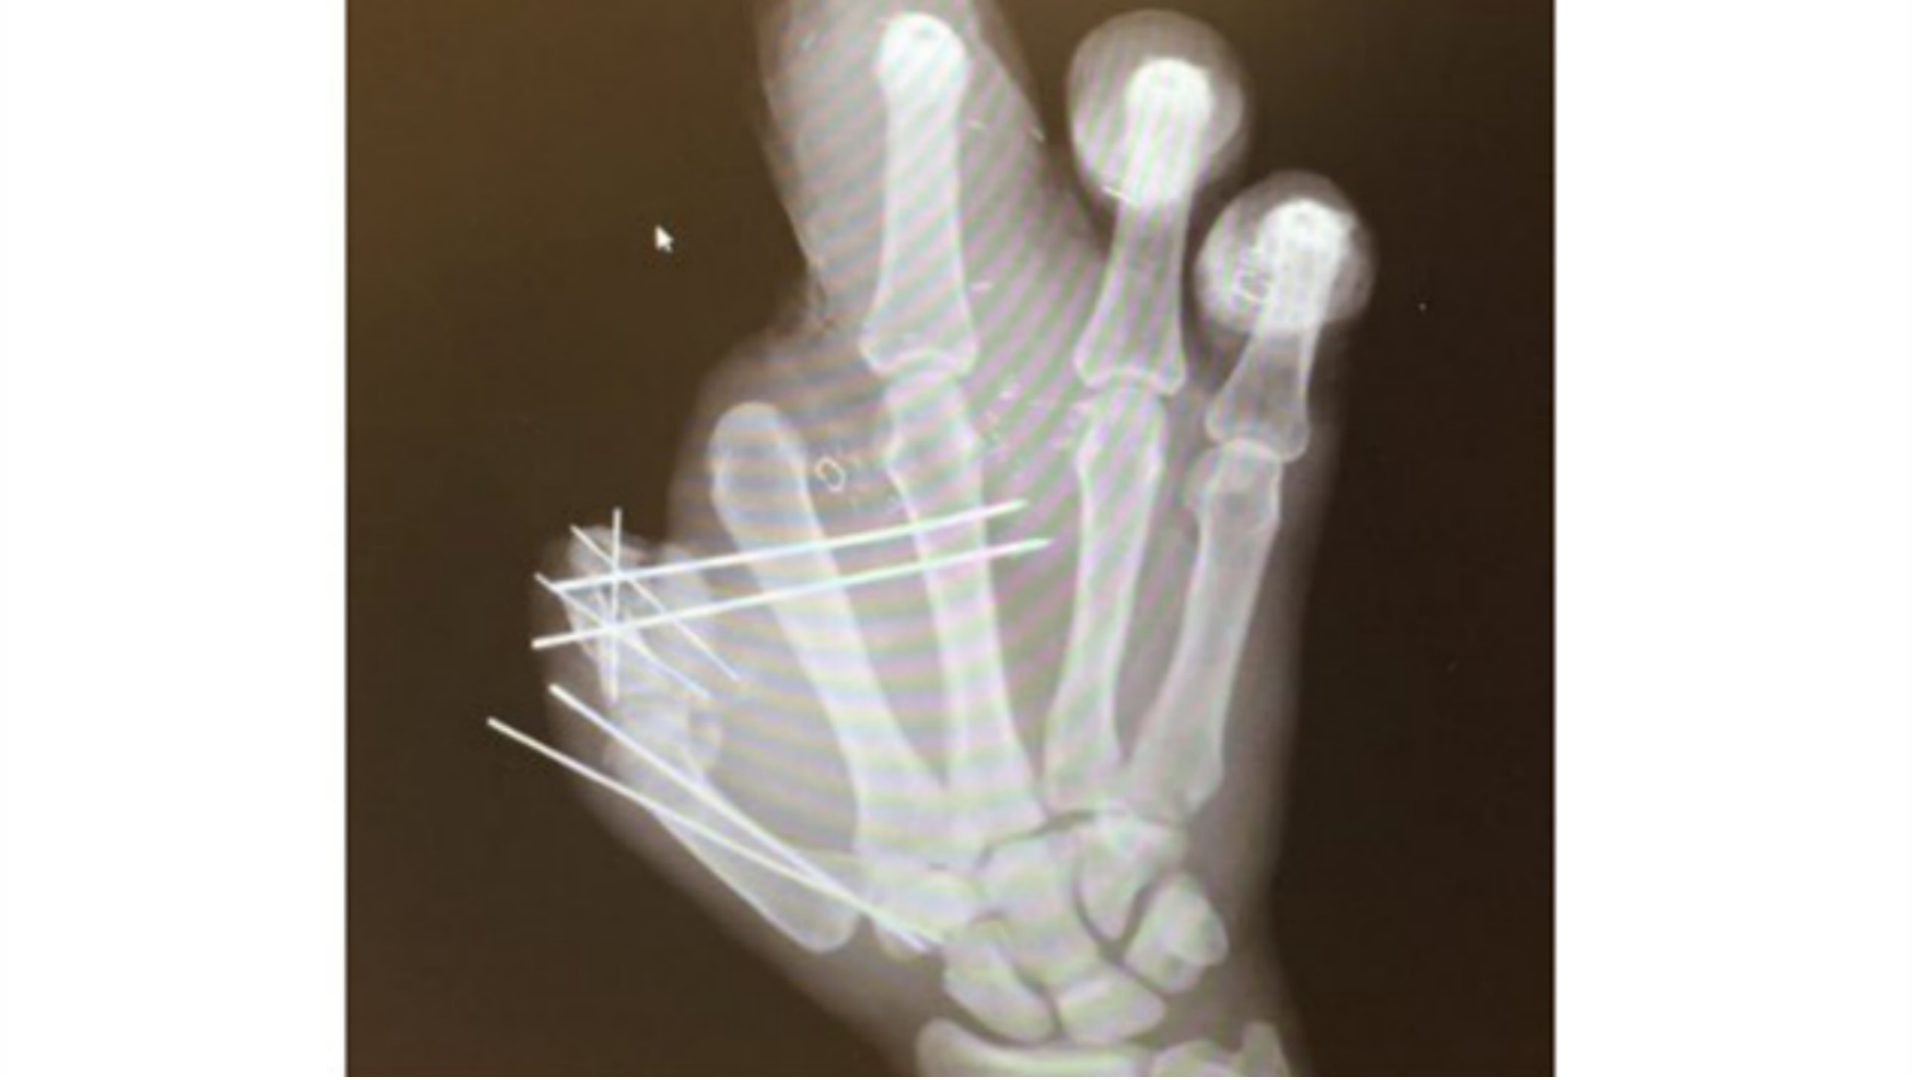 This is what an X-ray of Jason Pierre-Paul's hand looks like